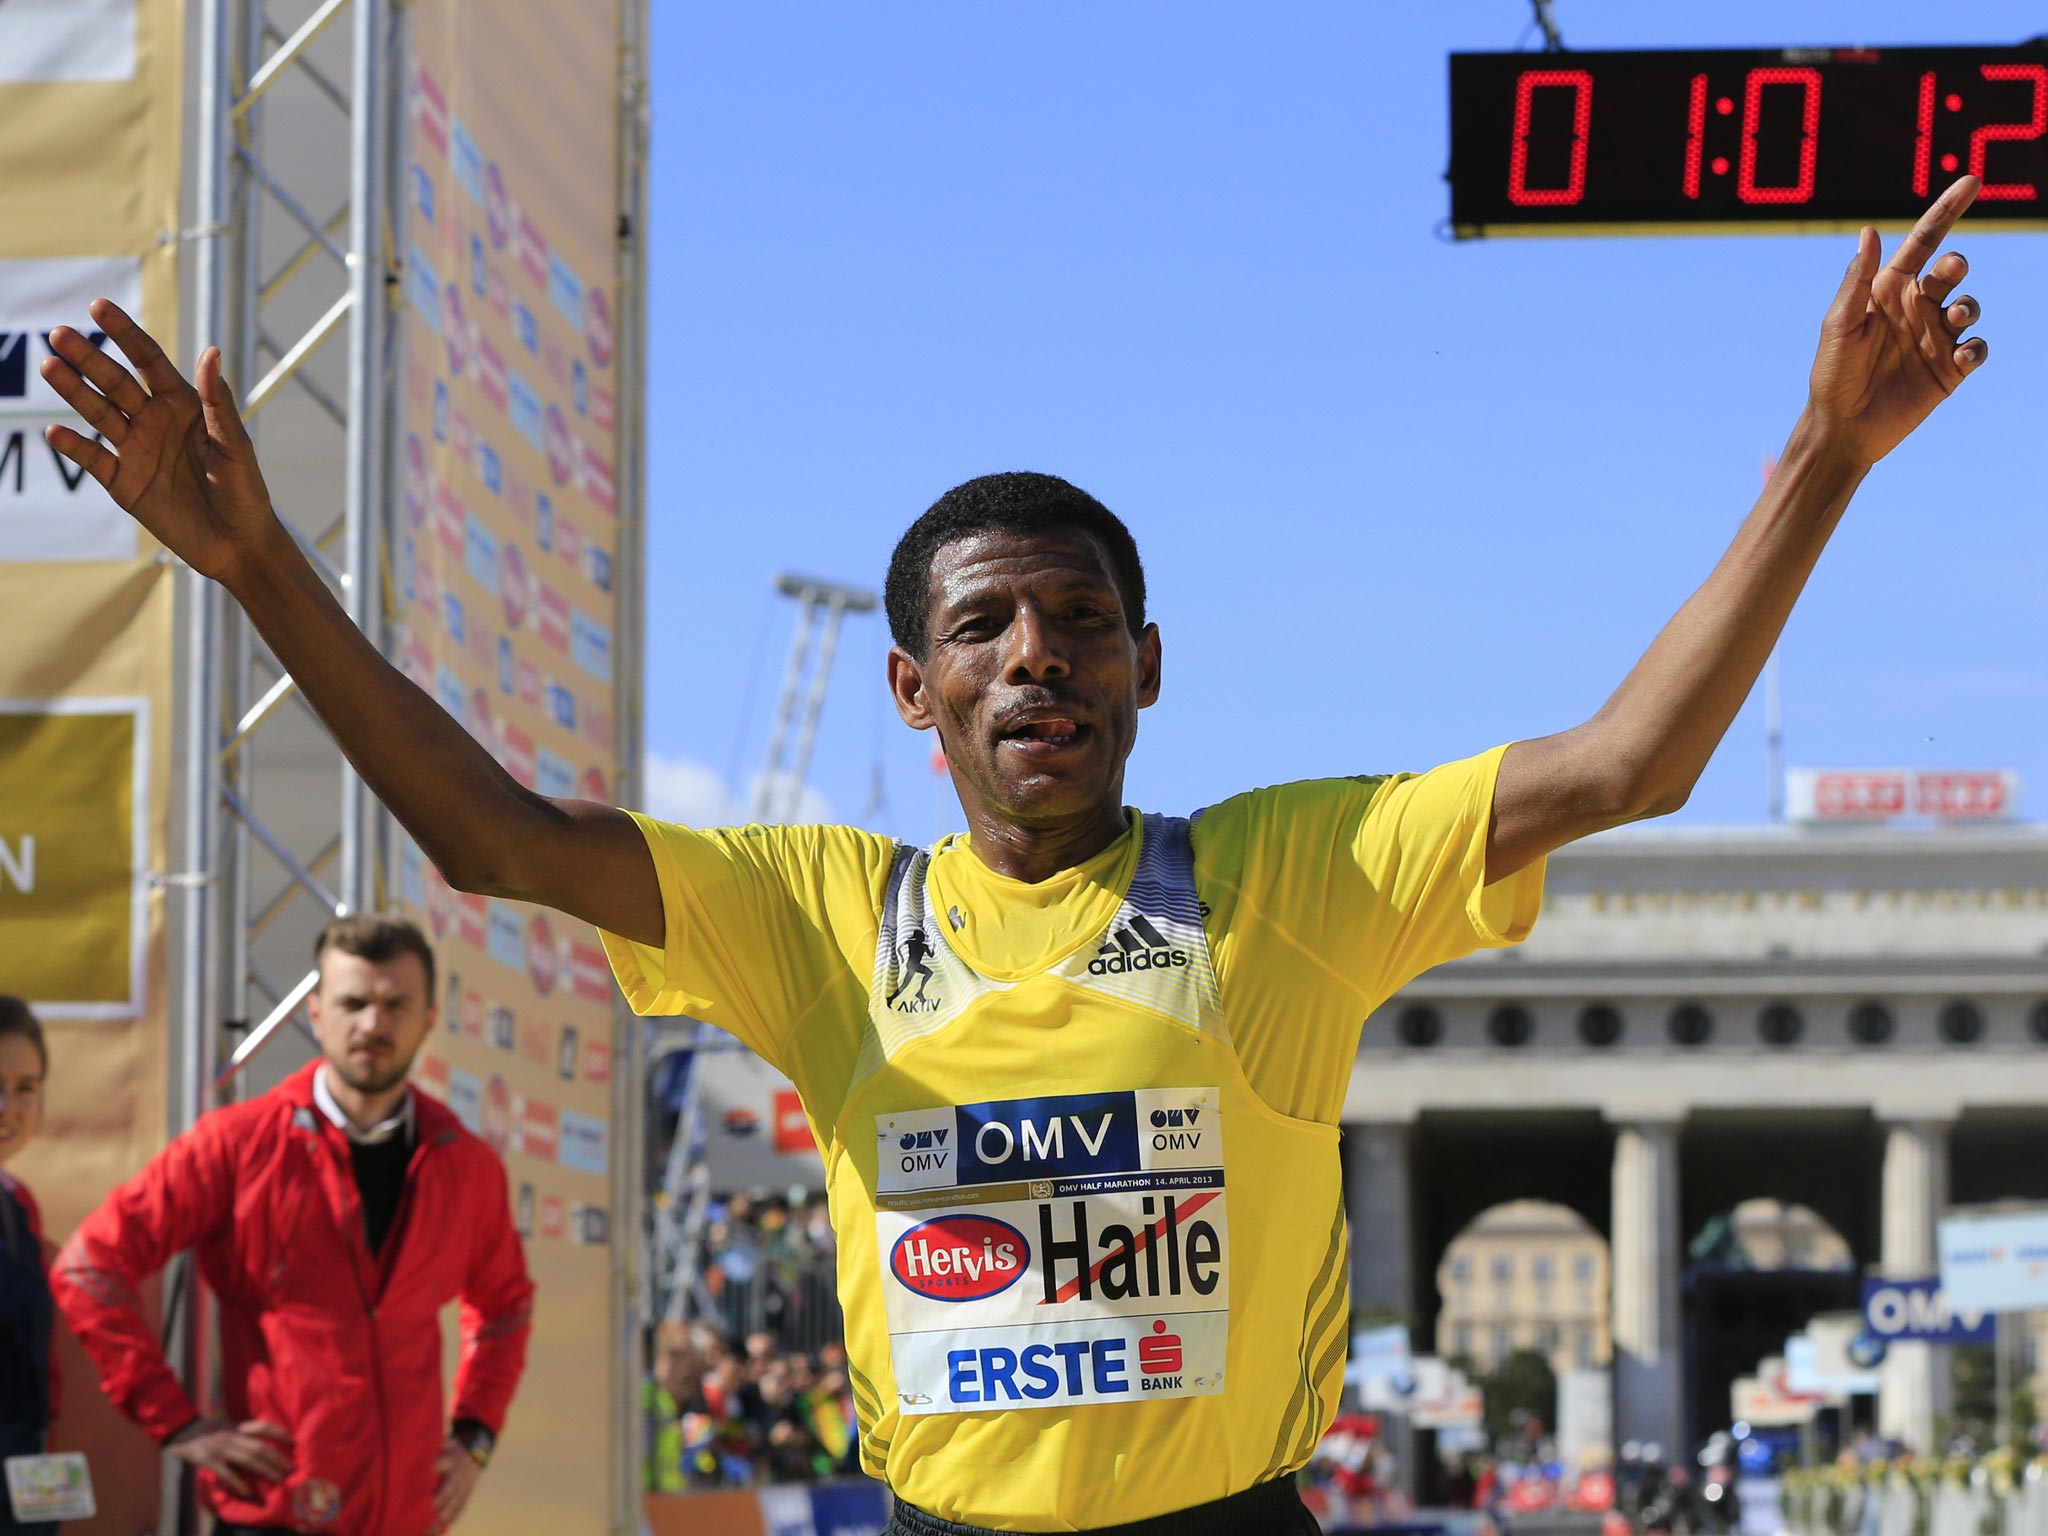 Haile Gebrselassie will set the pace at the London Marathon